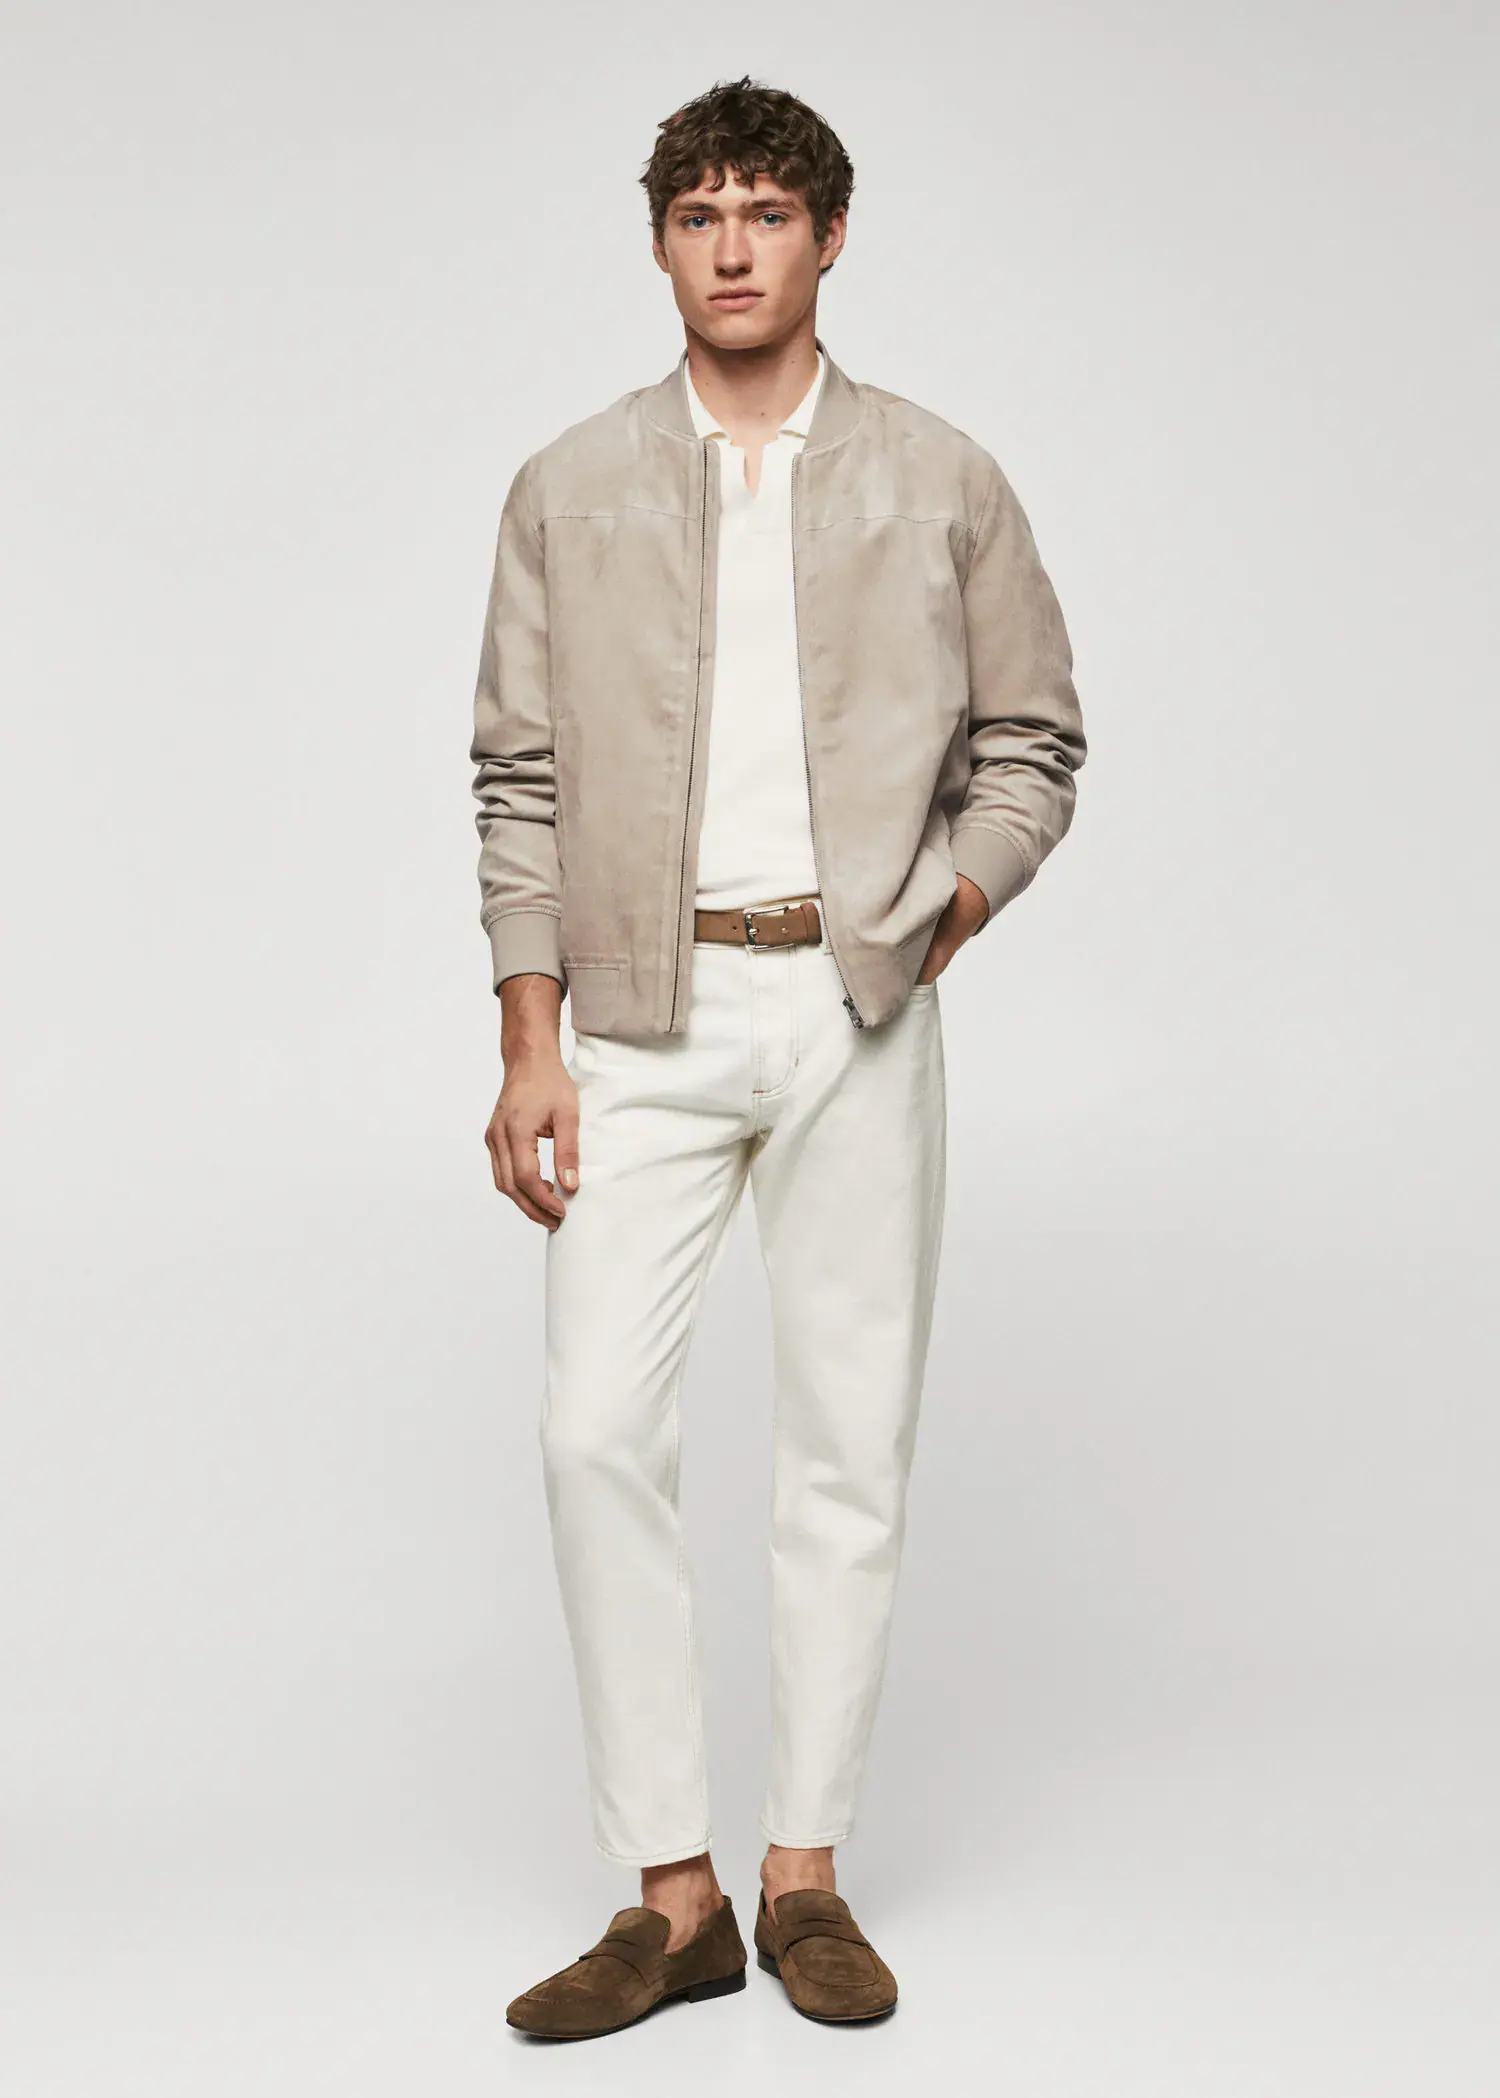 Mango Suede-effect bomber jacket. a man in a tan jacket and white pants. 